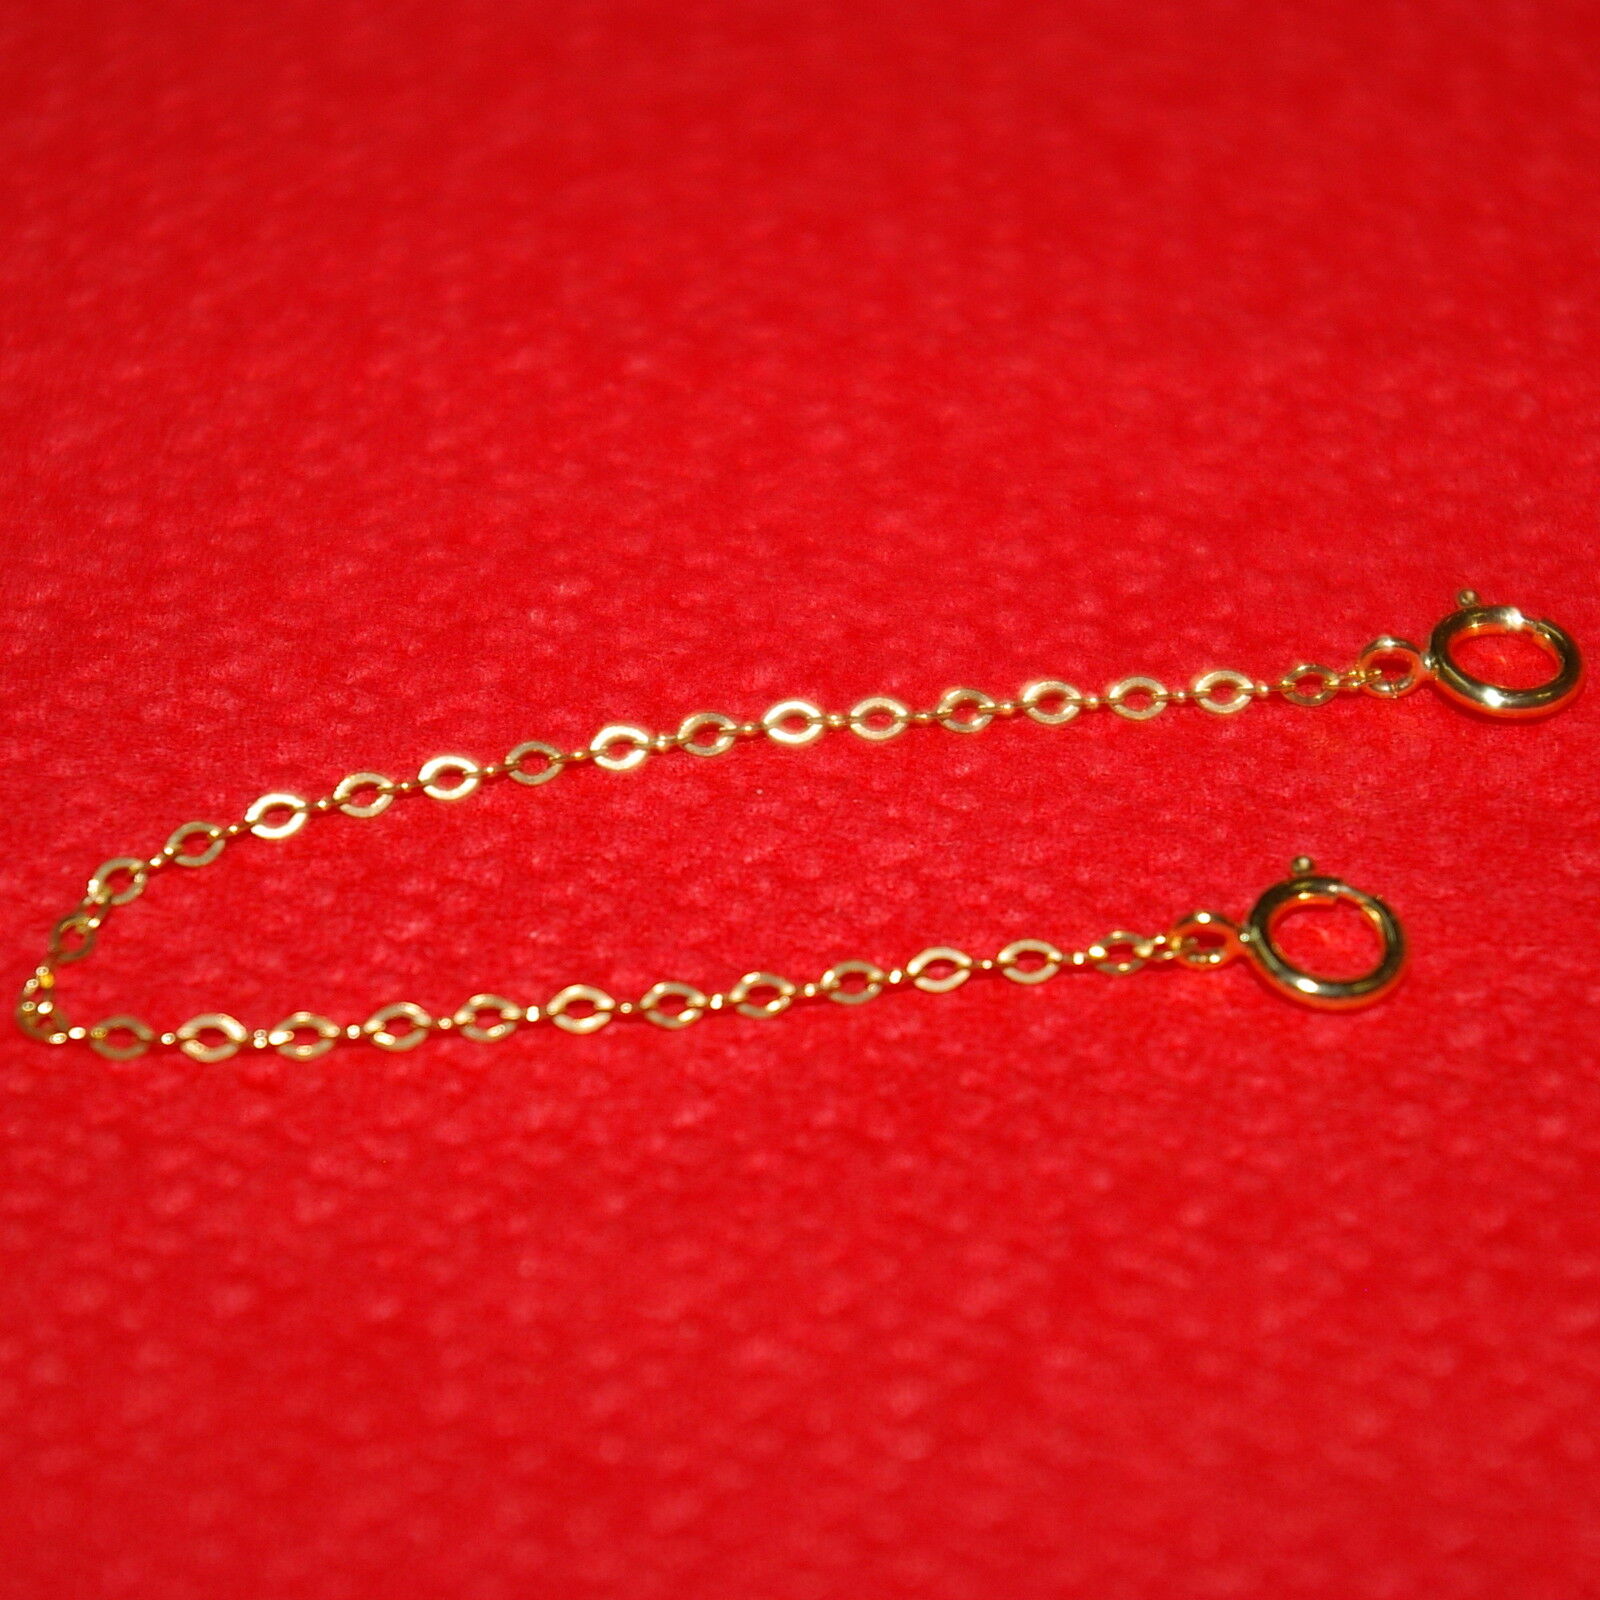 5 pcs 14kt GOLD FILLED 1.5x2mm Flat Cable Chain EXTENDERS with Two Spring Clasps BalliSilver - фотография #8